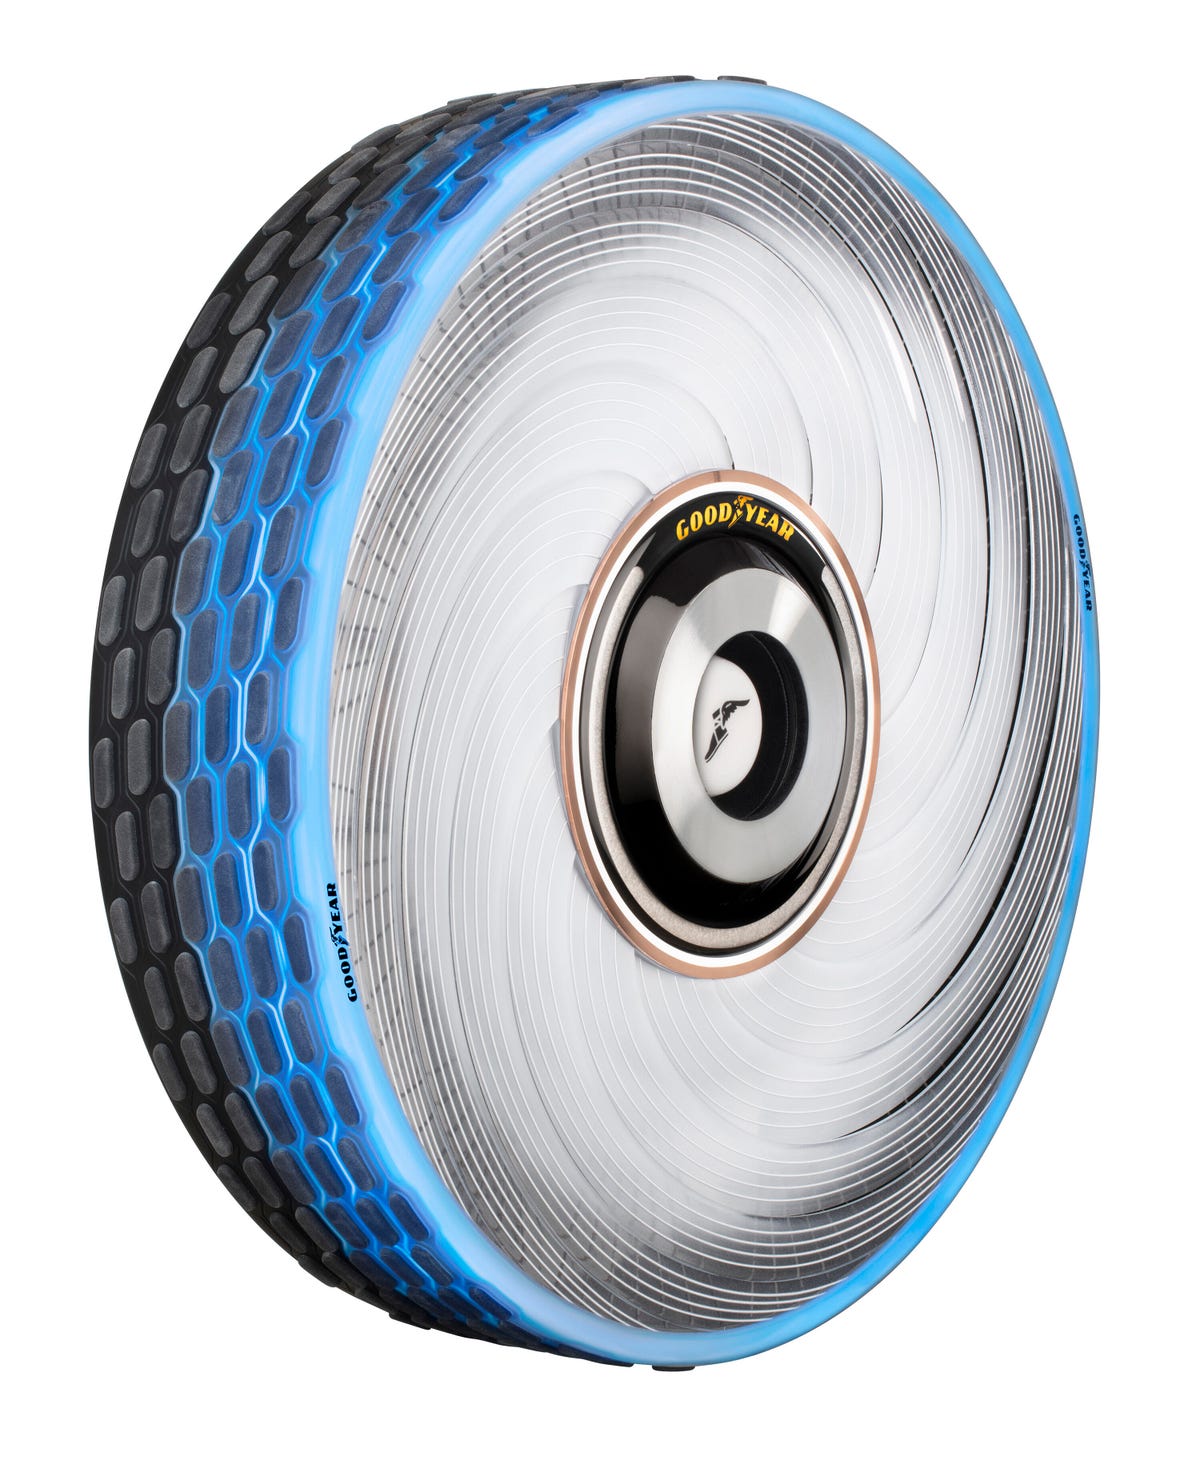 Goodyear reCharge concept tire